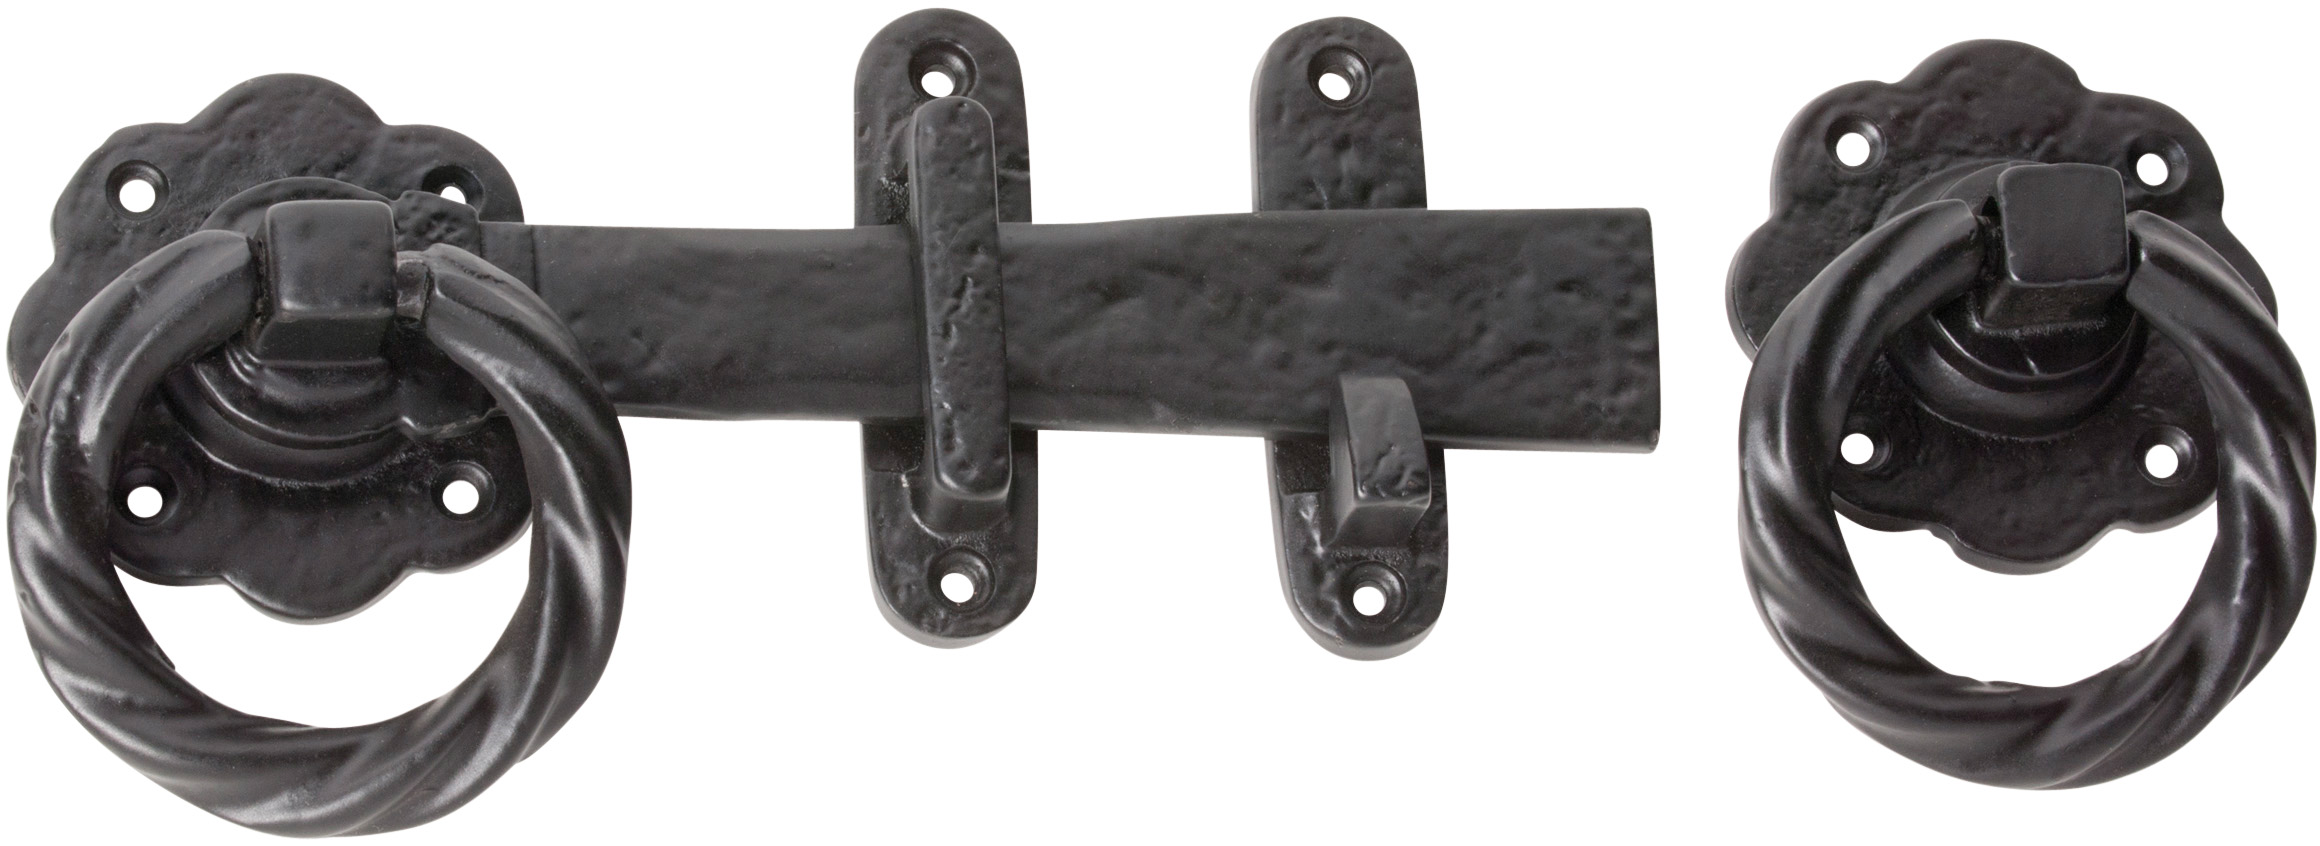 Twisted Ring Gate Latch - 150mm (Epoxy Black Plated)